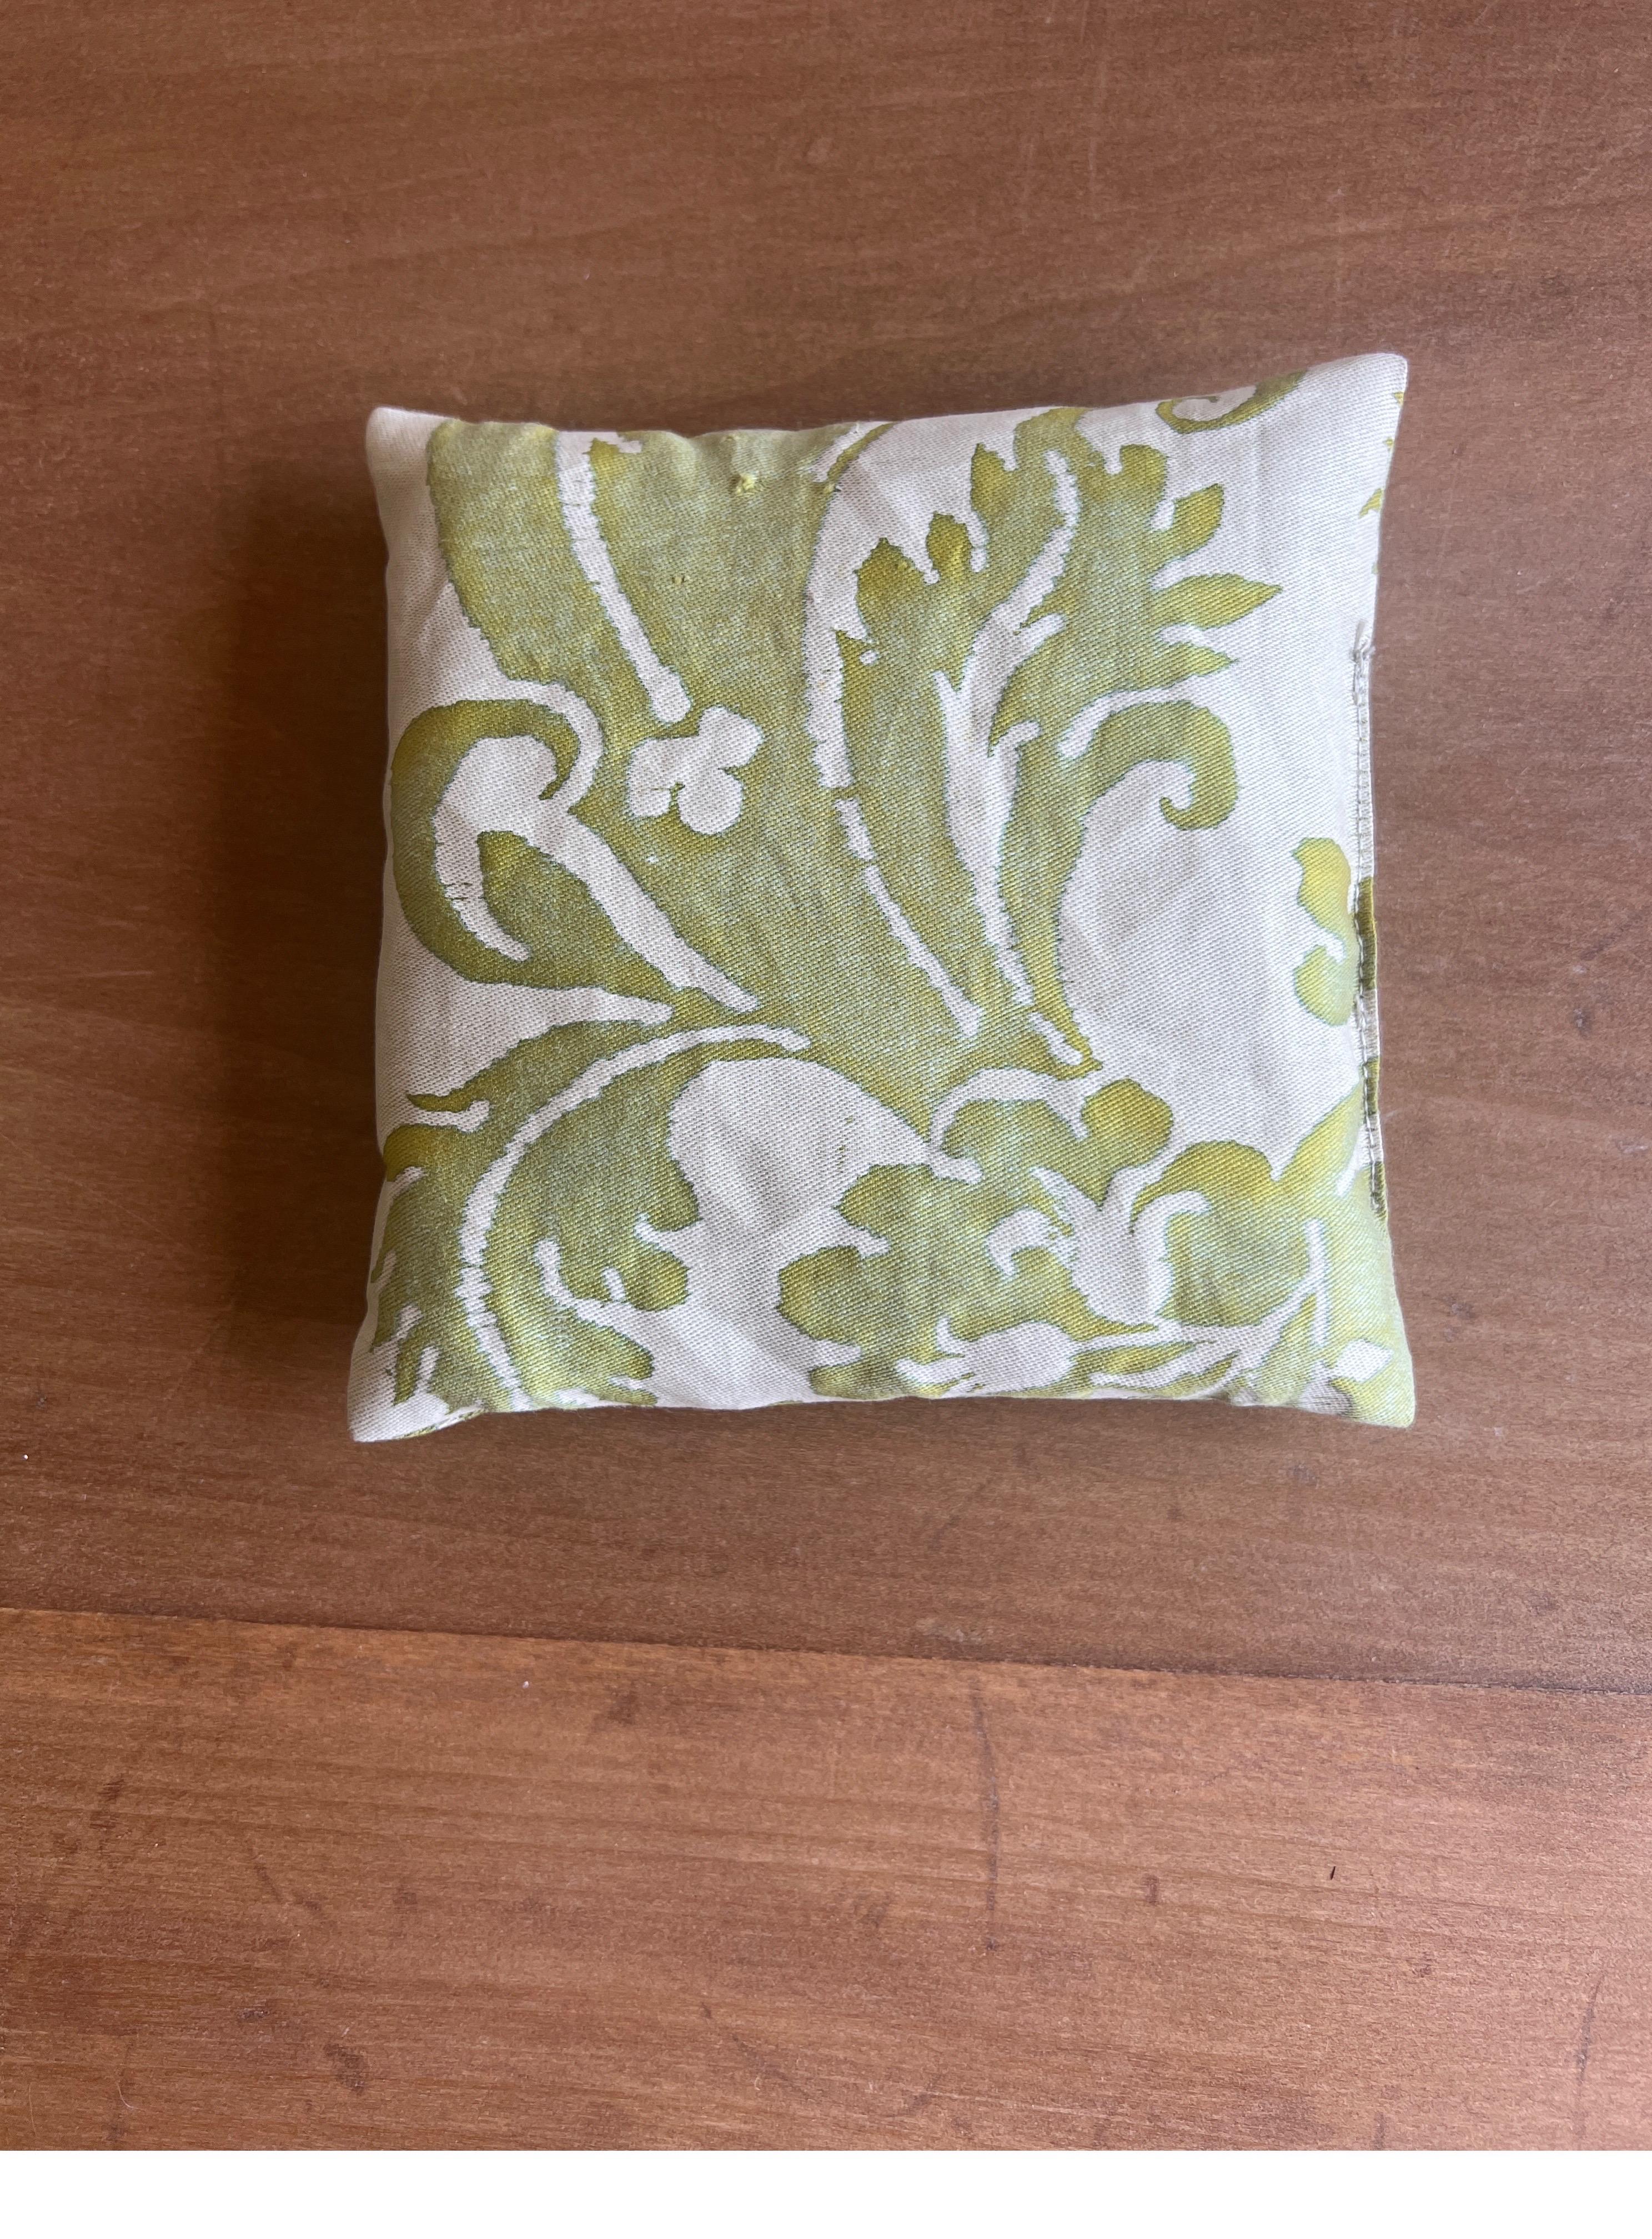 Newly made lavender filled sachet made with vintage green & white cotton Fotruny on both sides.